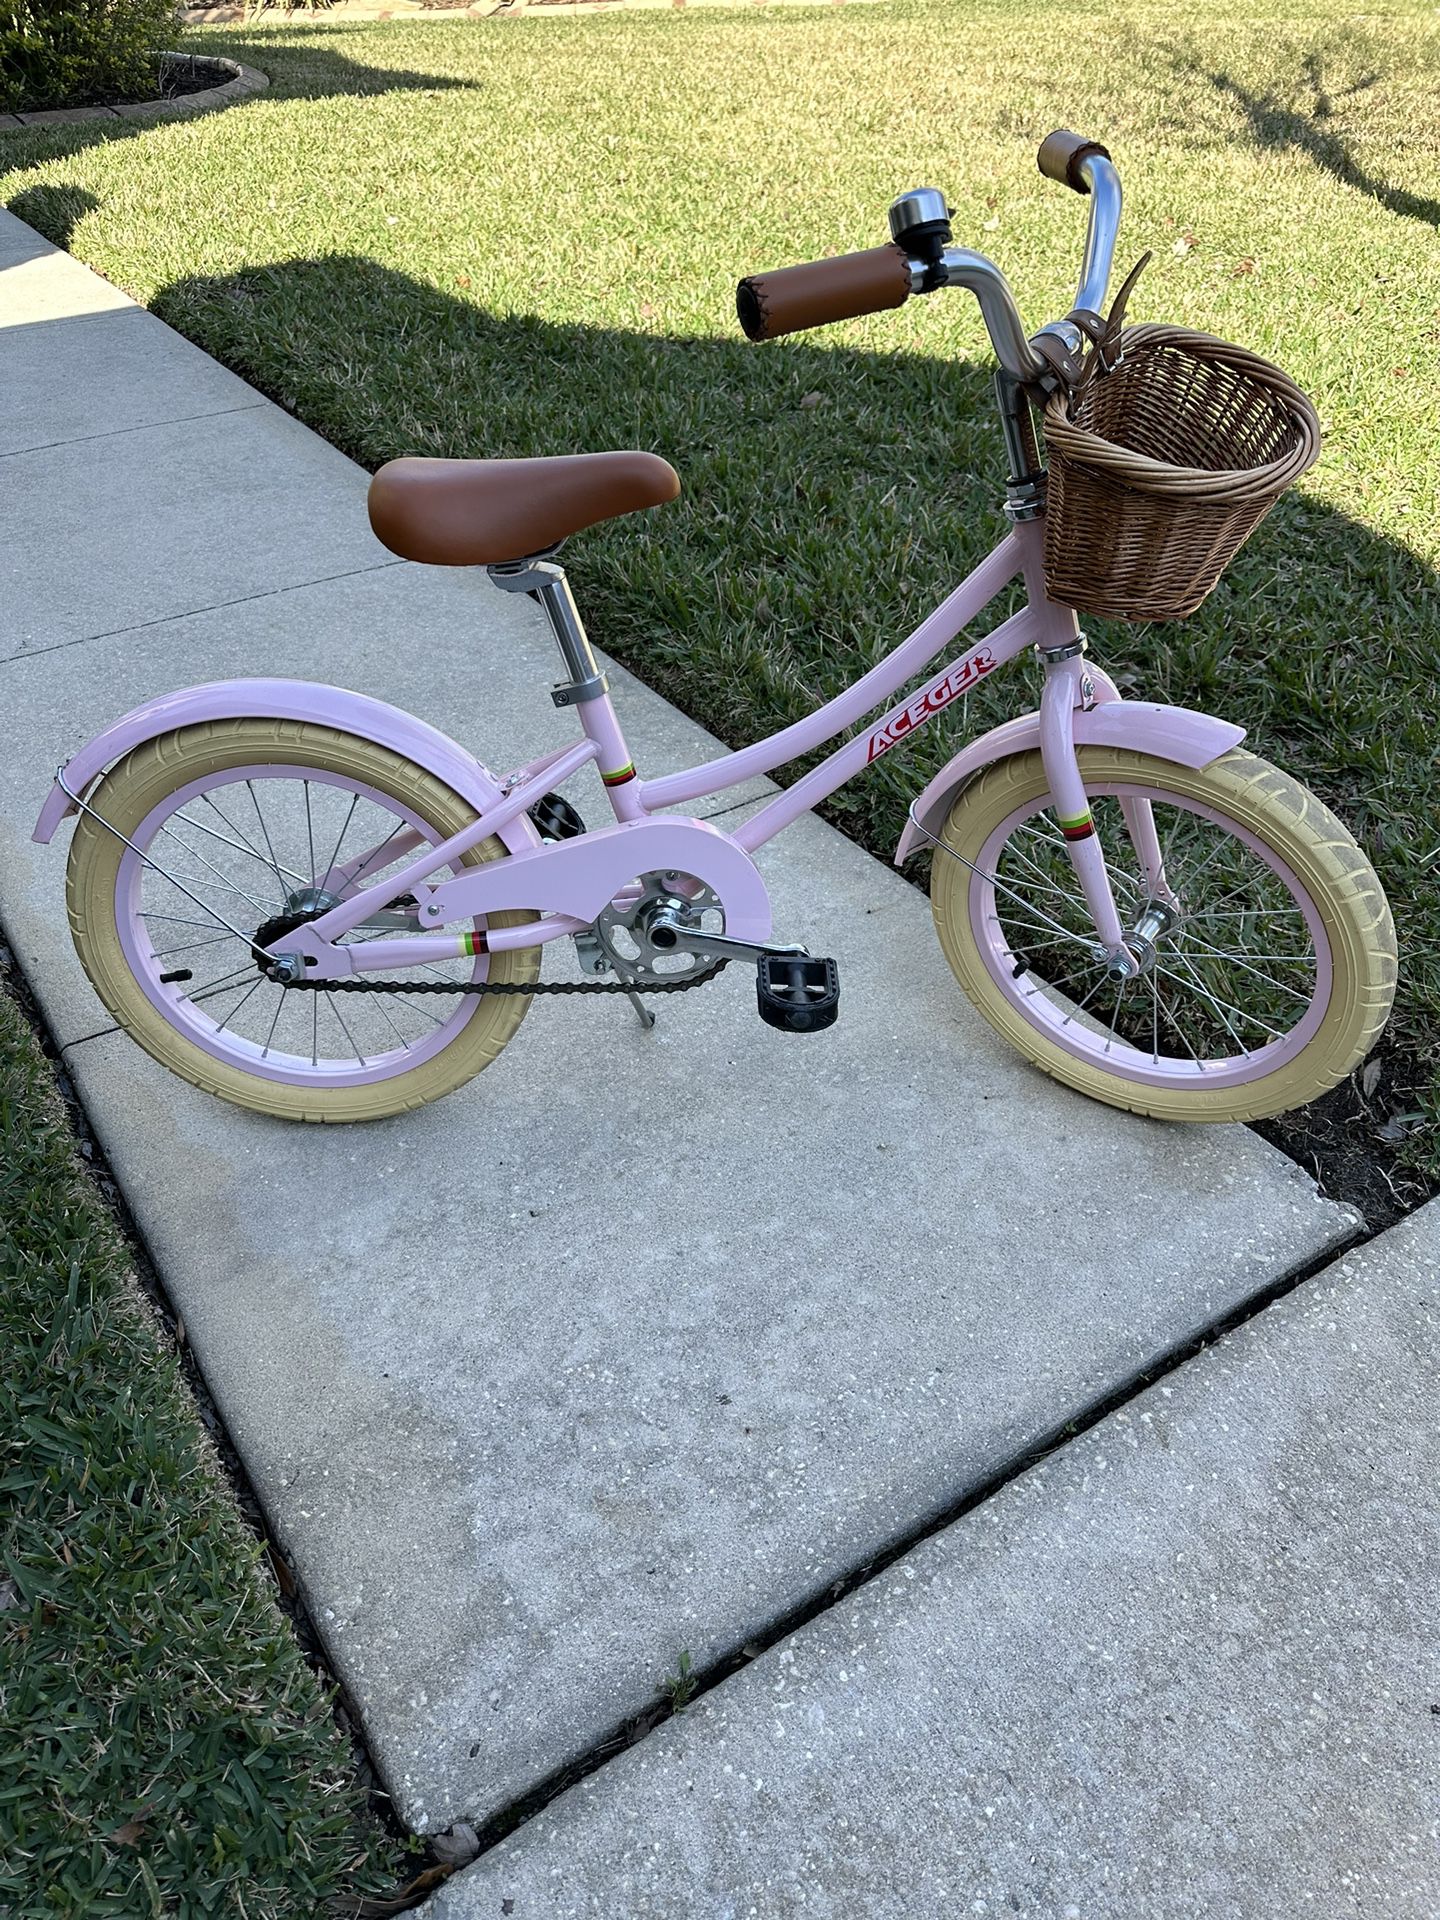 ACEGER Girls Bike with Basket, Kids Bike for 4-6 Years, 14 inch with